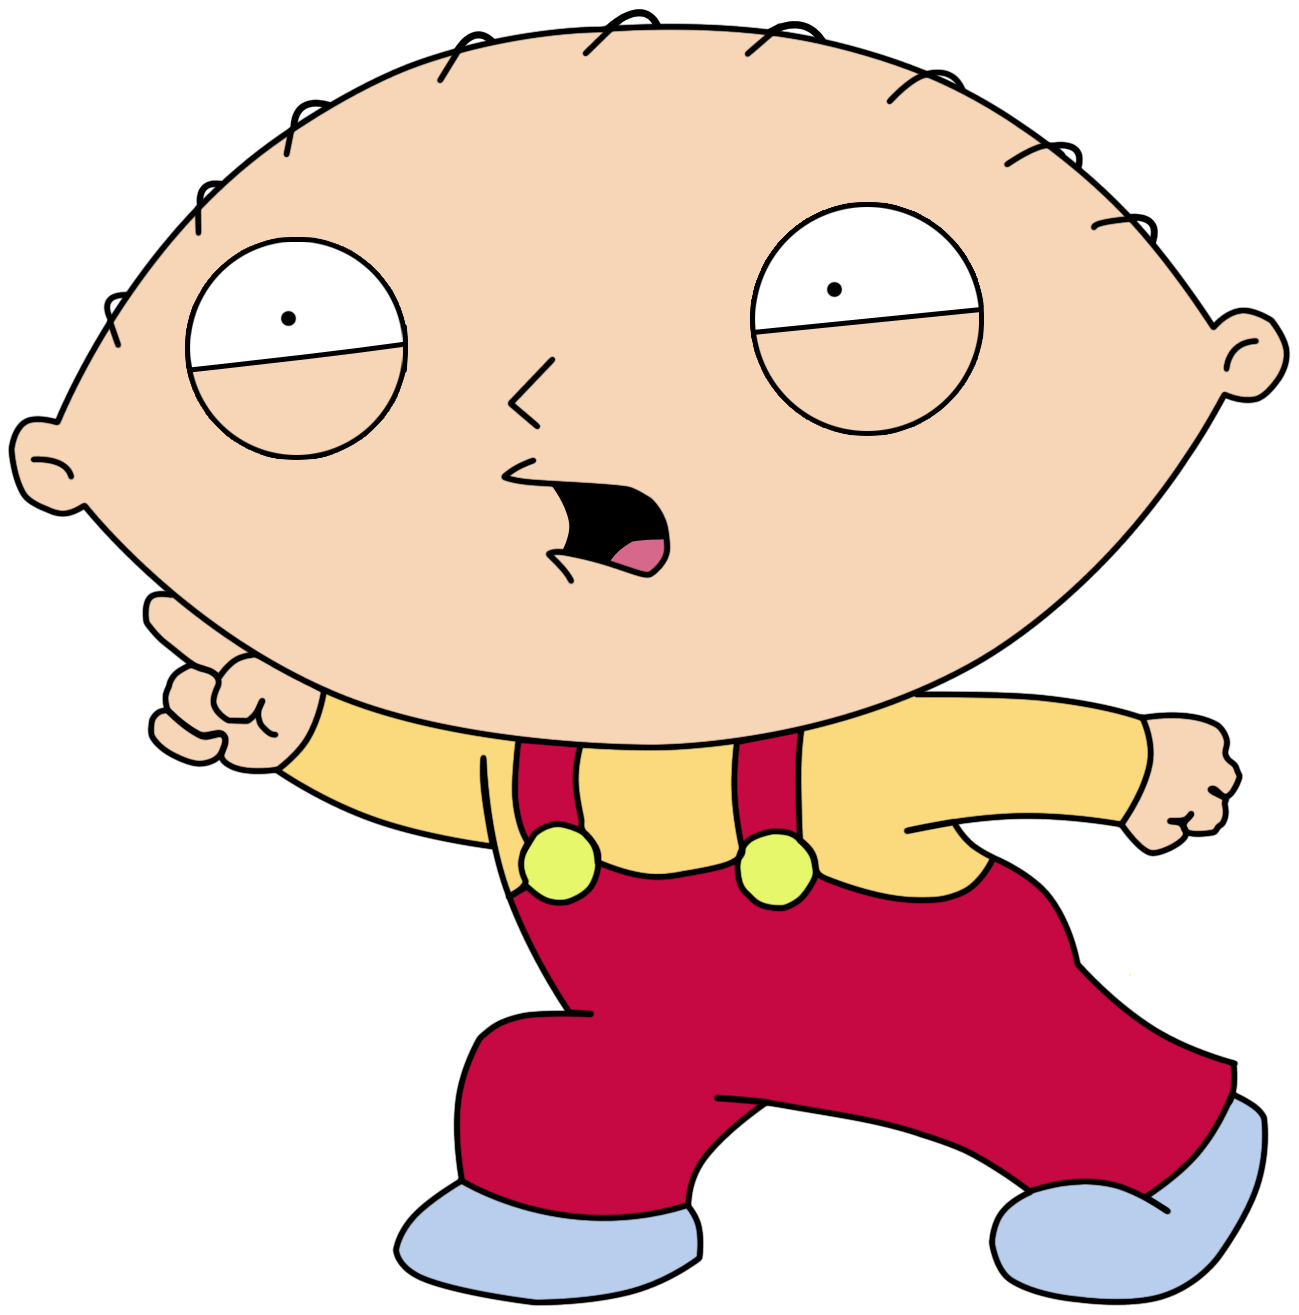 Stewie Griffin, is the anti-heroic tetartagonist of Family Guy. 